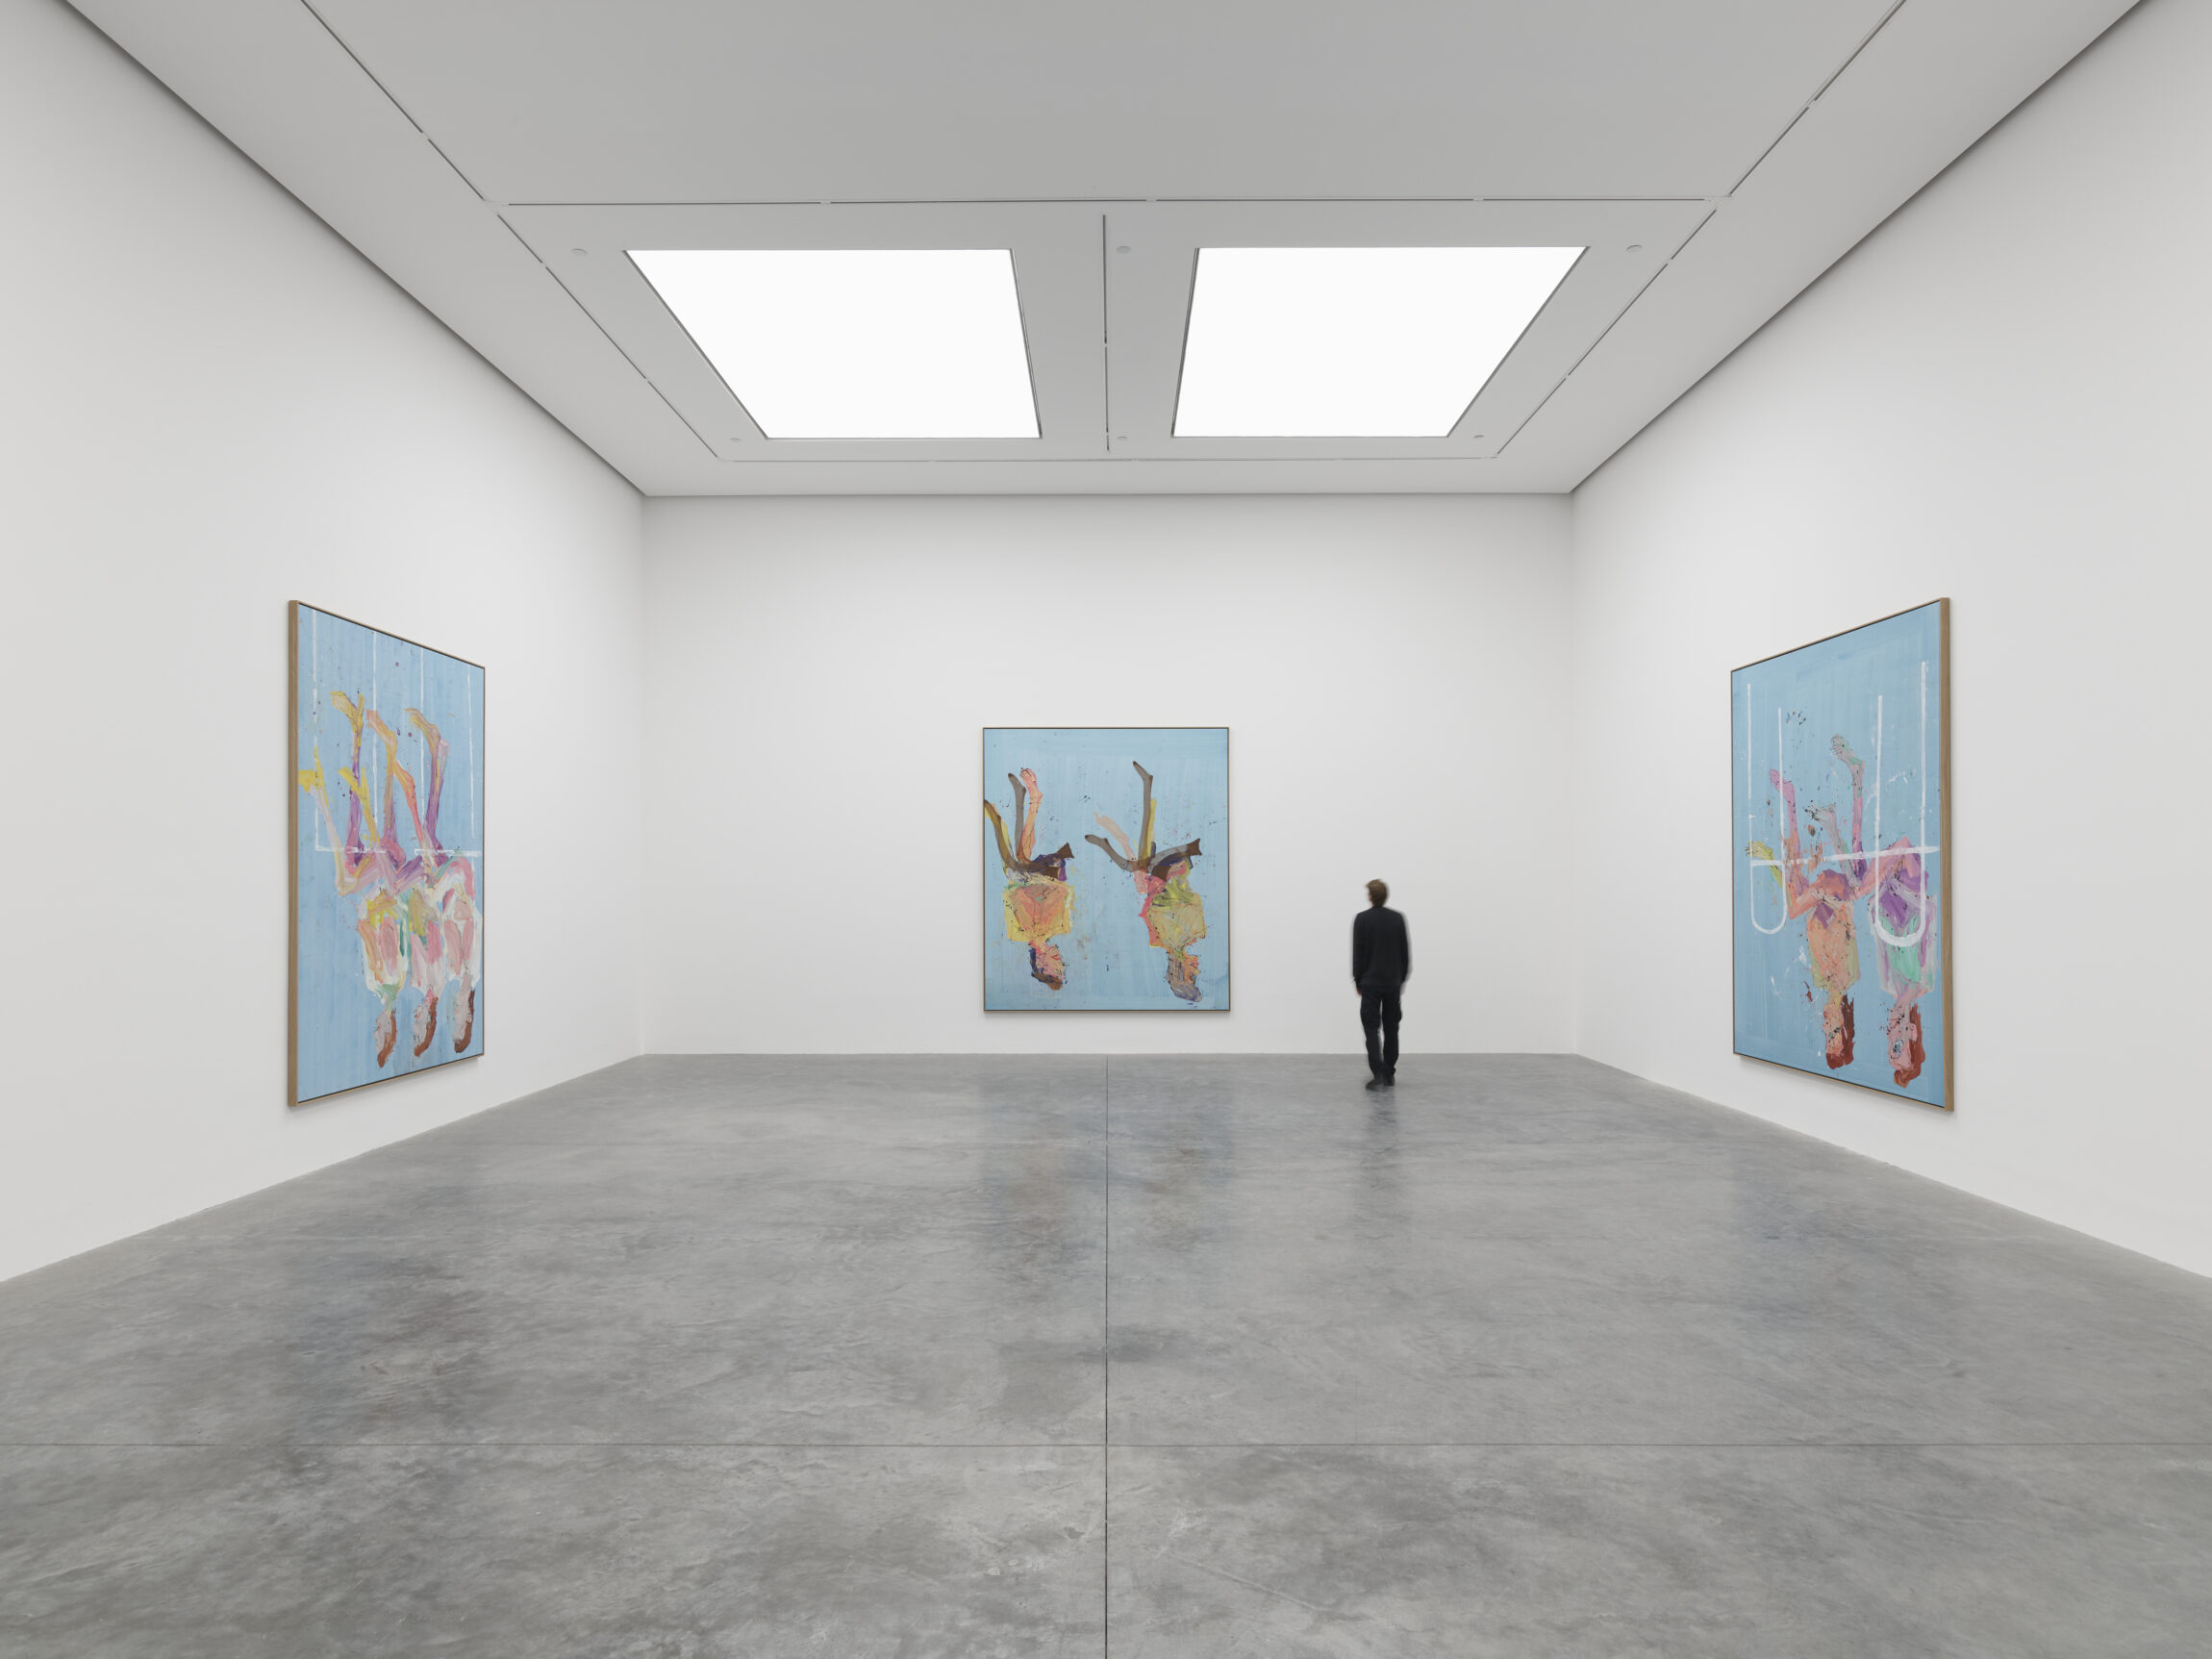 Large-scale paintings by Georg Baselitz frame the walls at White Cube Gallery